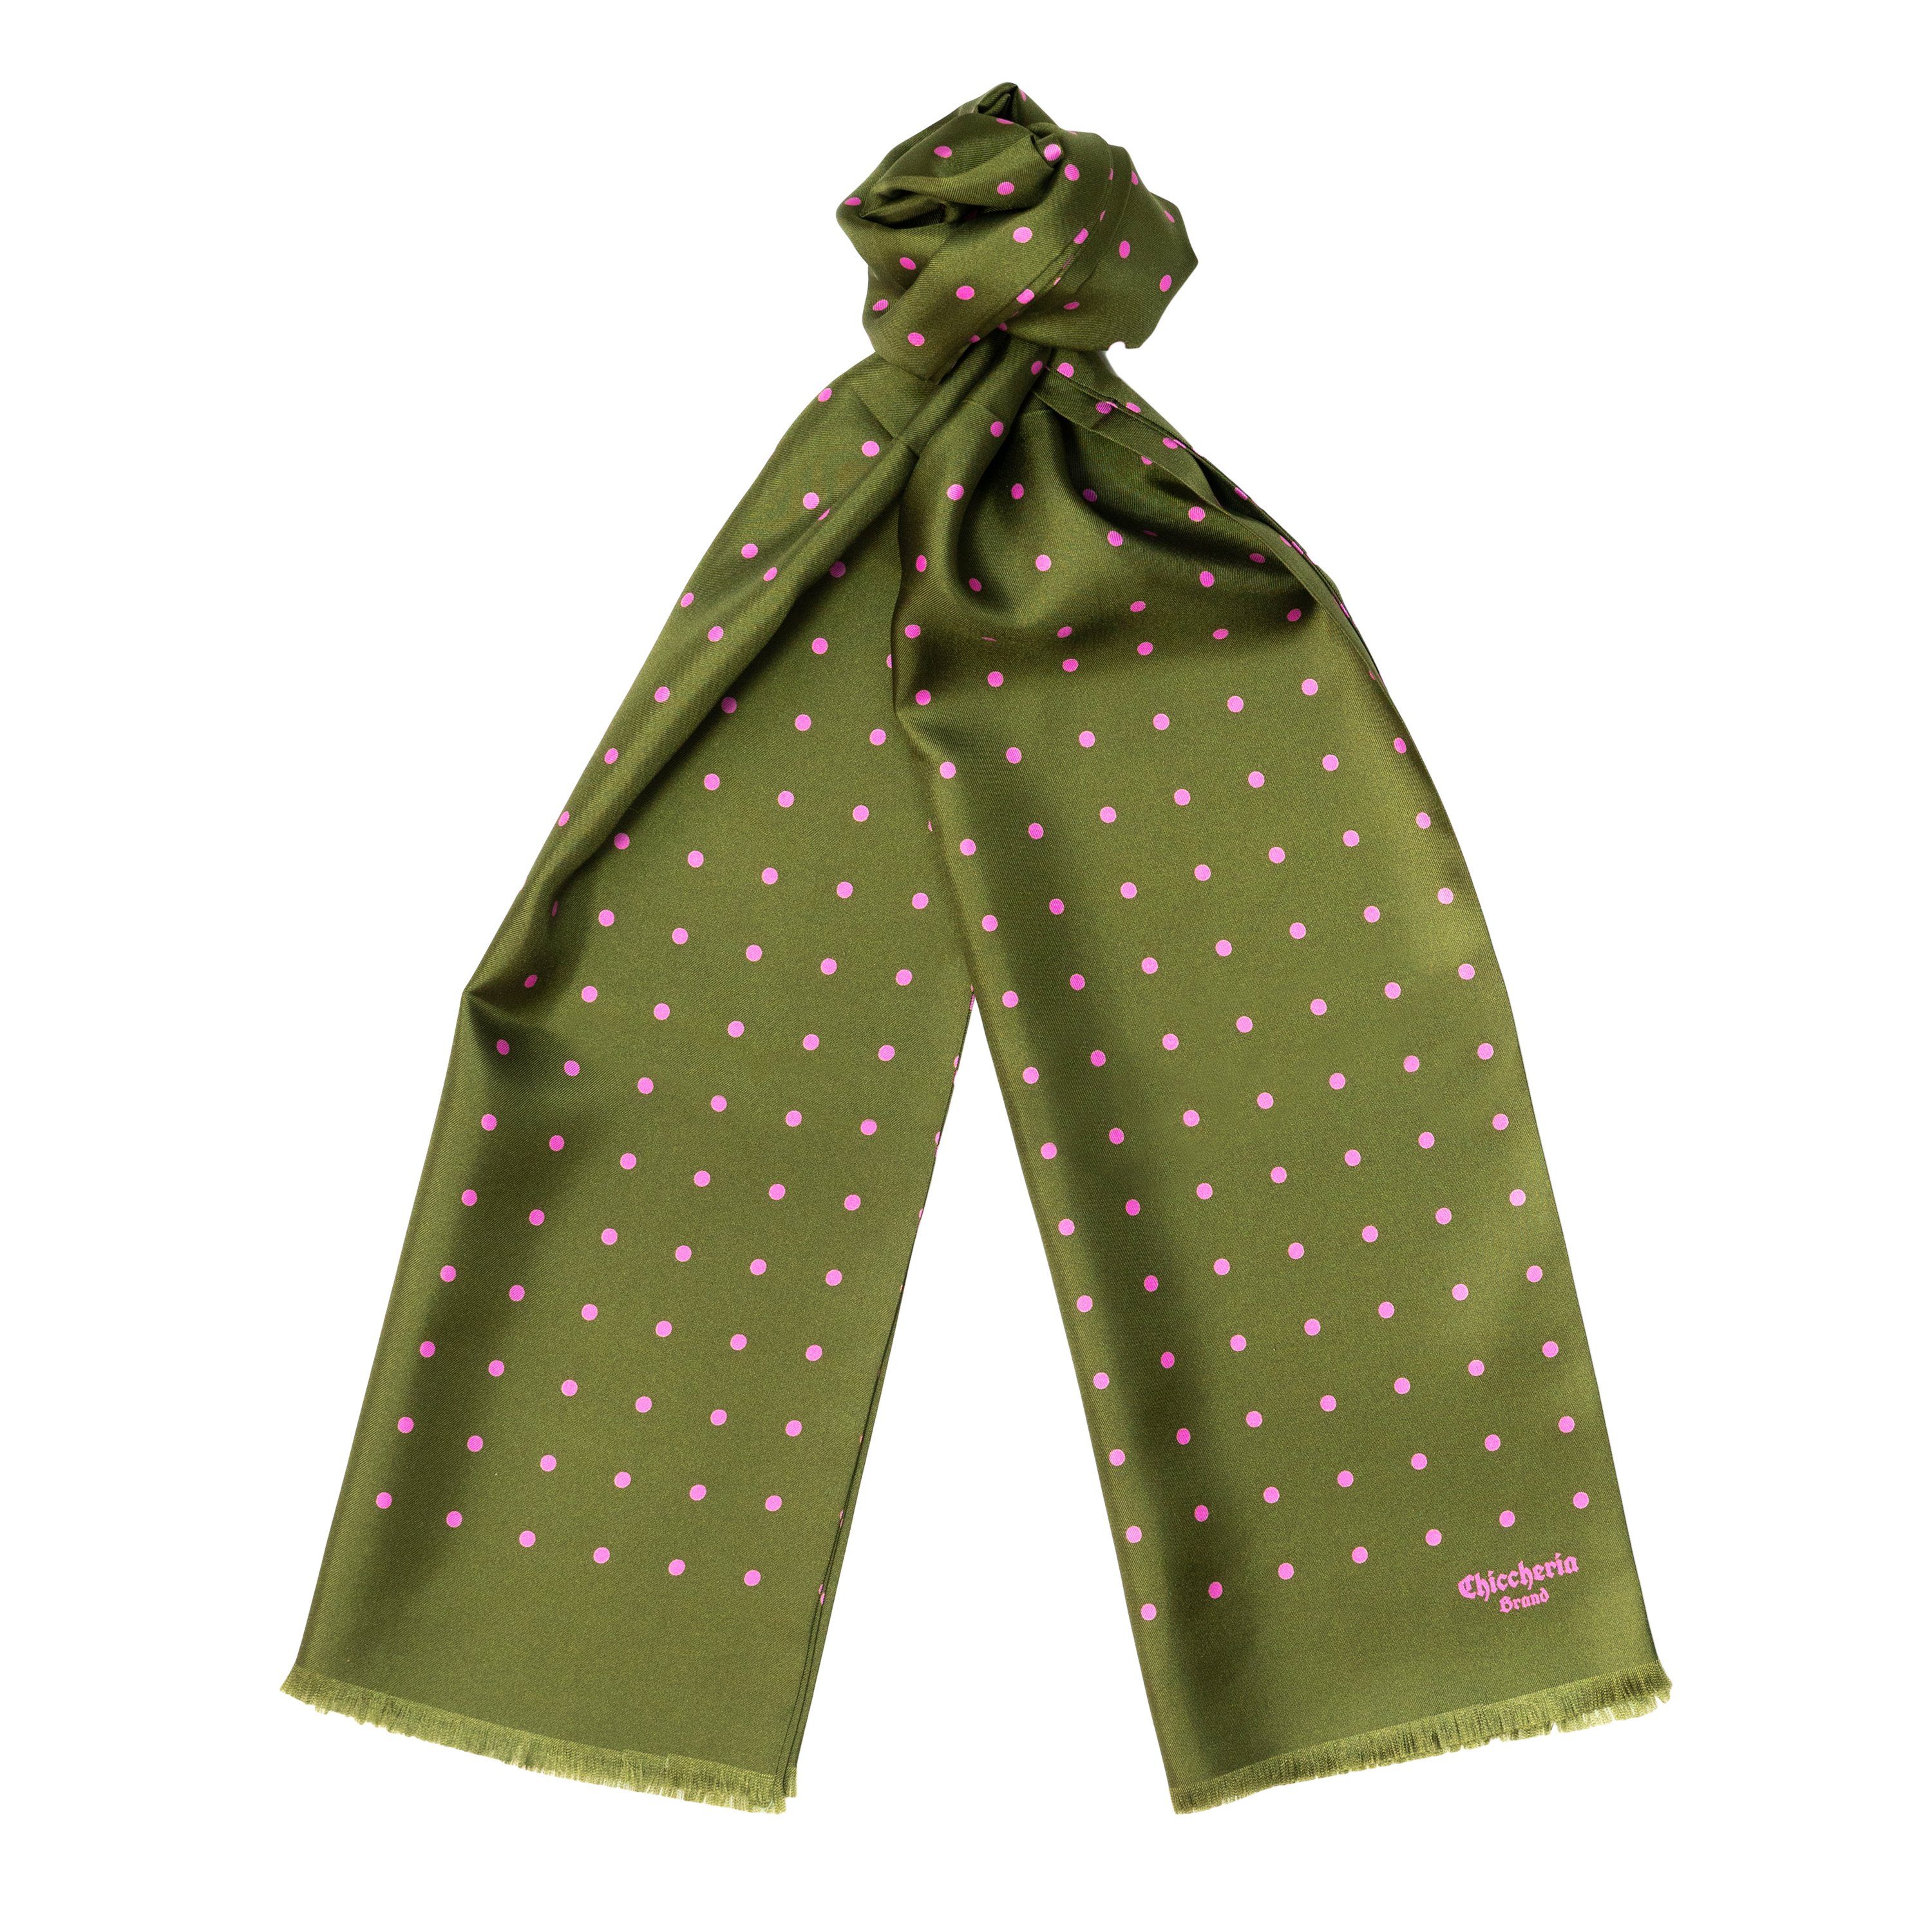 Chiccheria Brand Seidenschal BIG-DOTS, Made in Italy Oliv